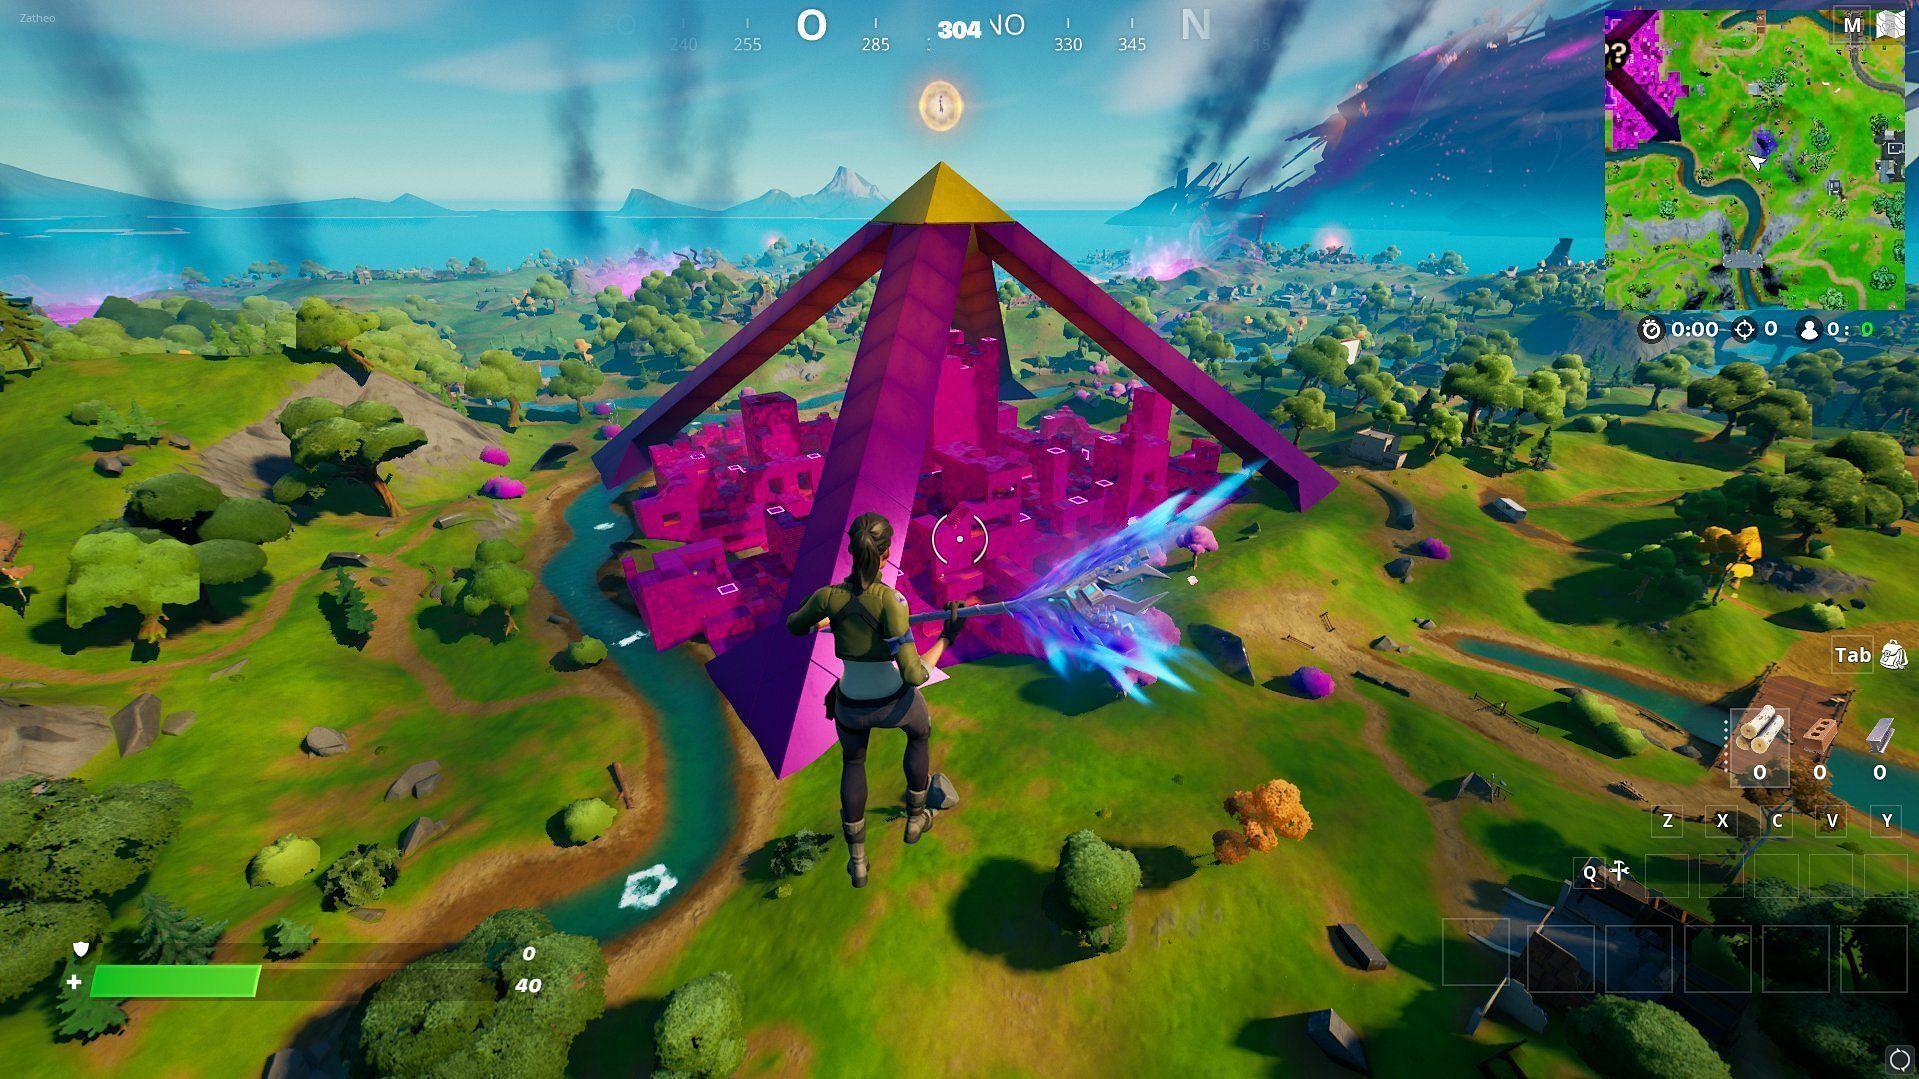 Fortnite Cube Town has finally turned into a Pyramid (Image via HYPEX)